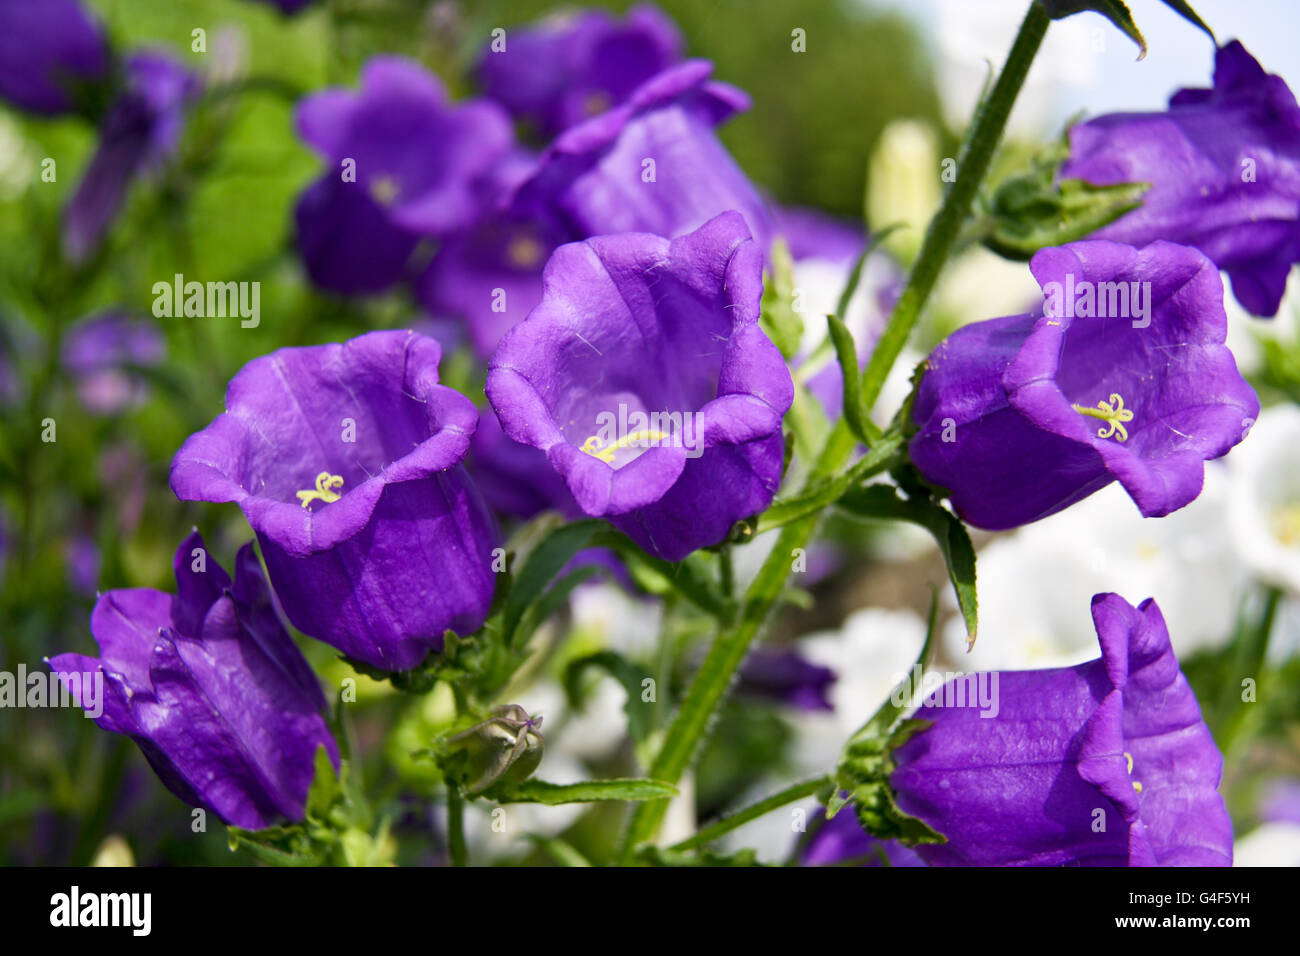 Flowers—campanula. Family Campanulaceae with the common name bellflower. Stock Photo